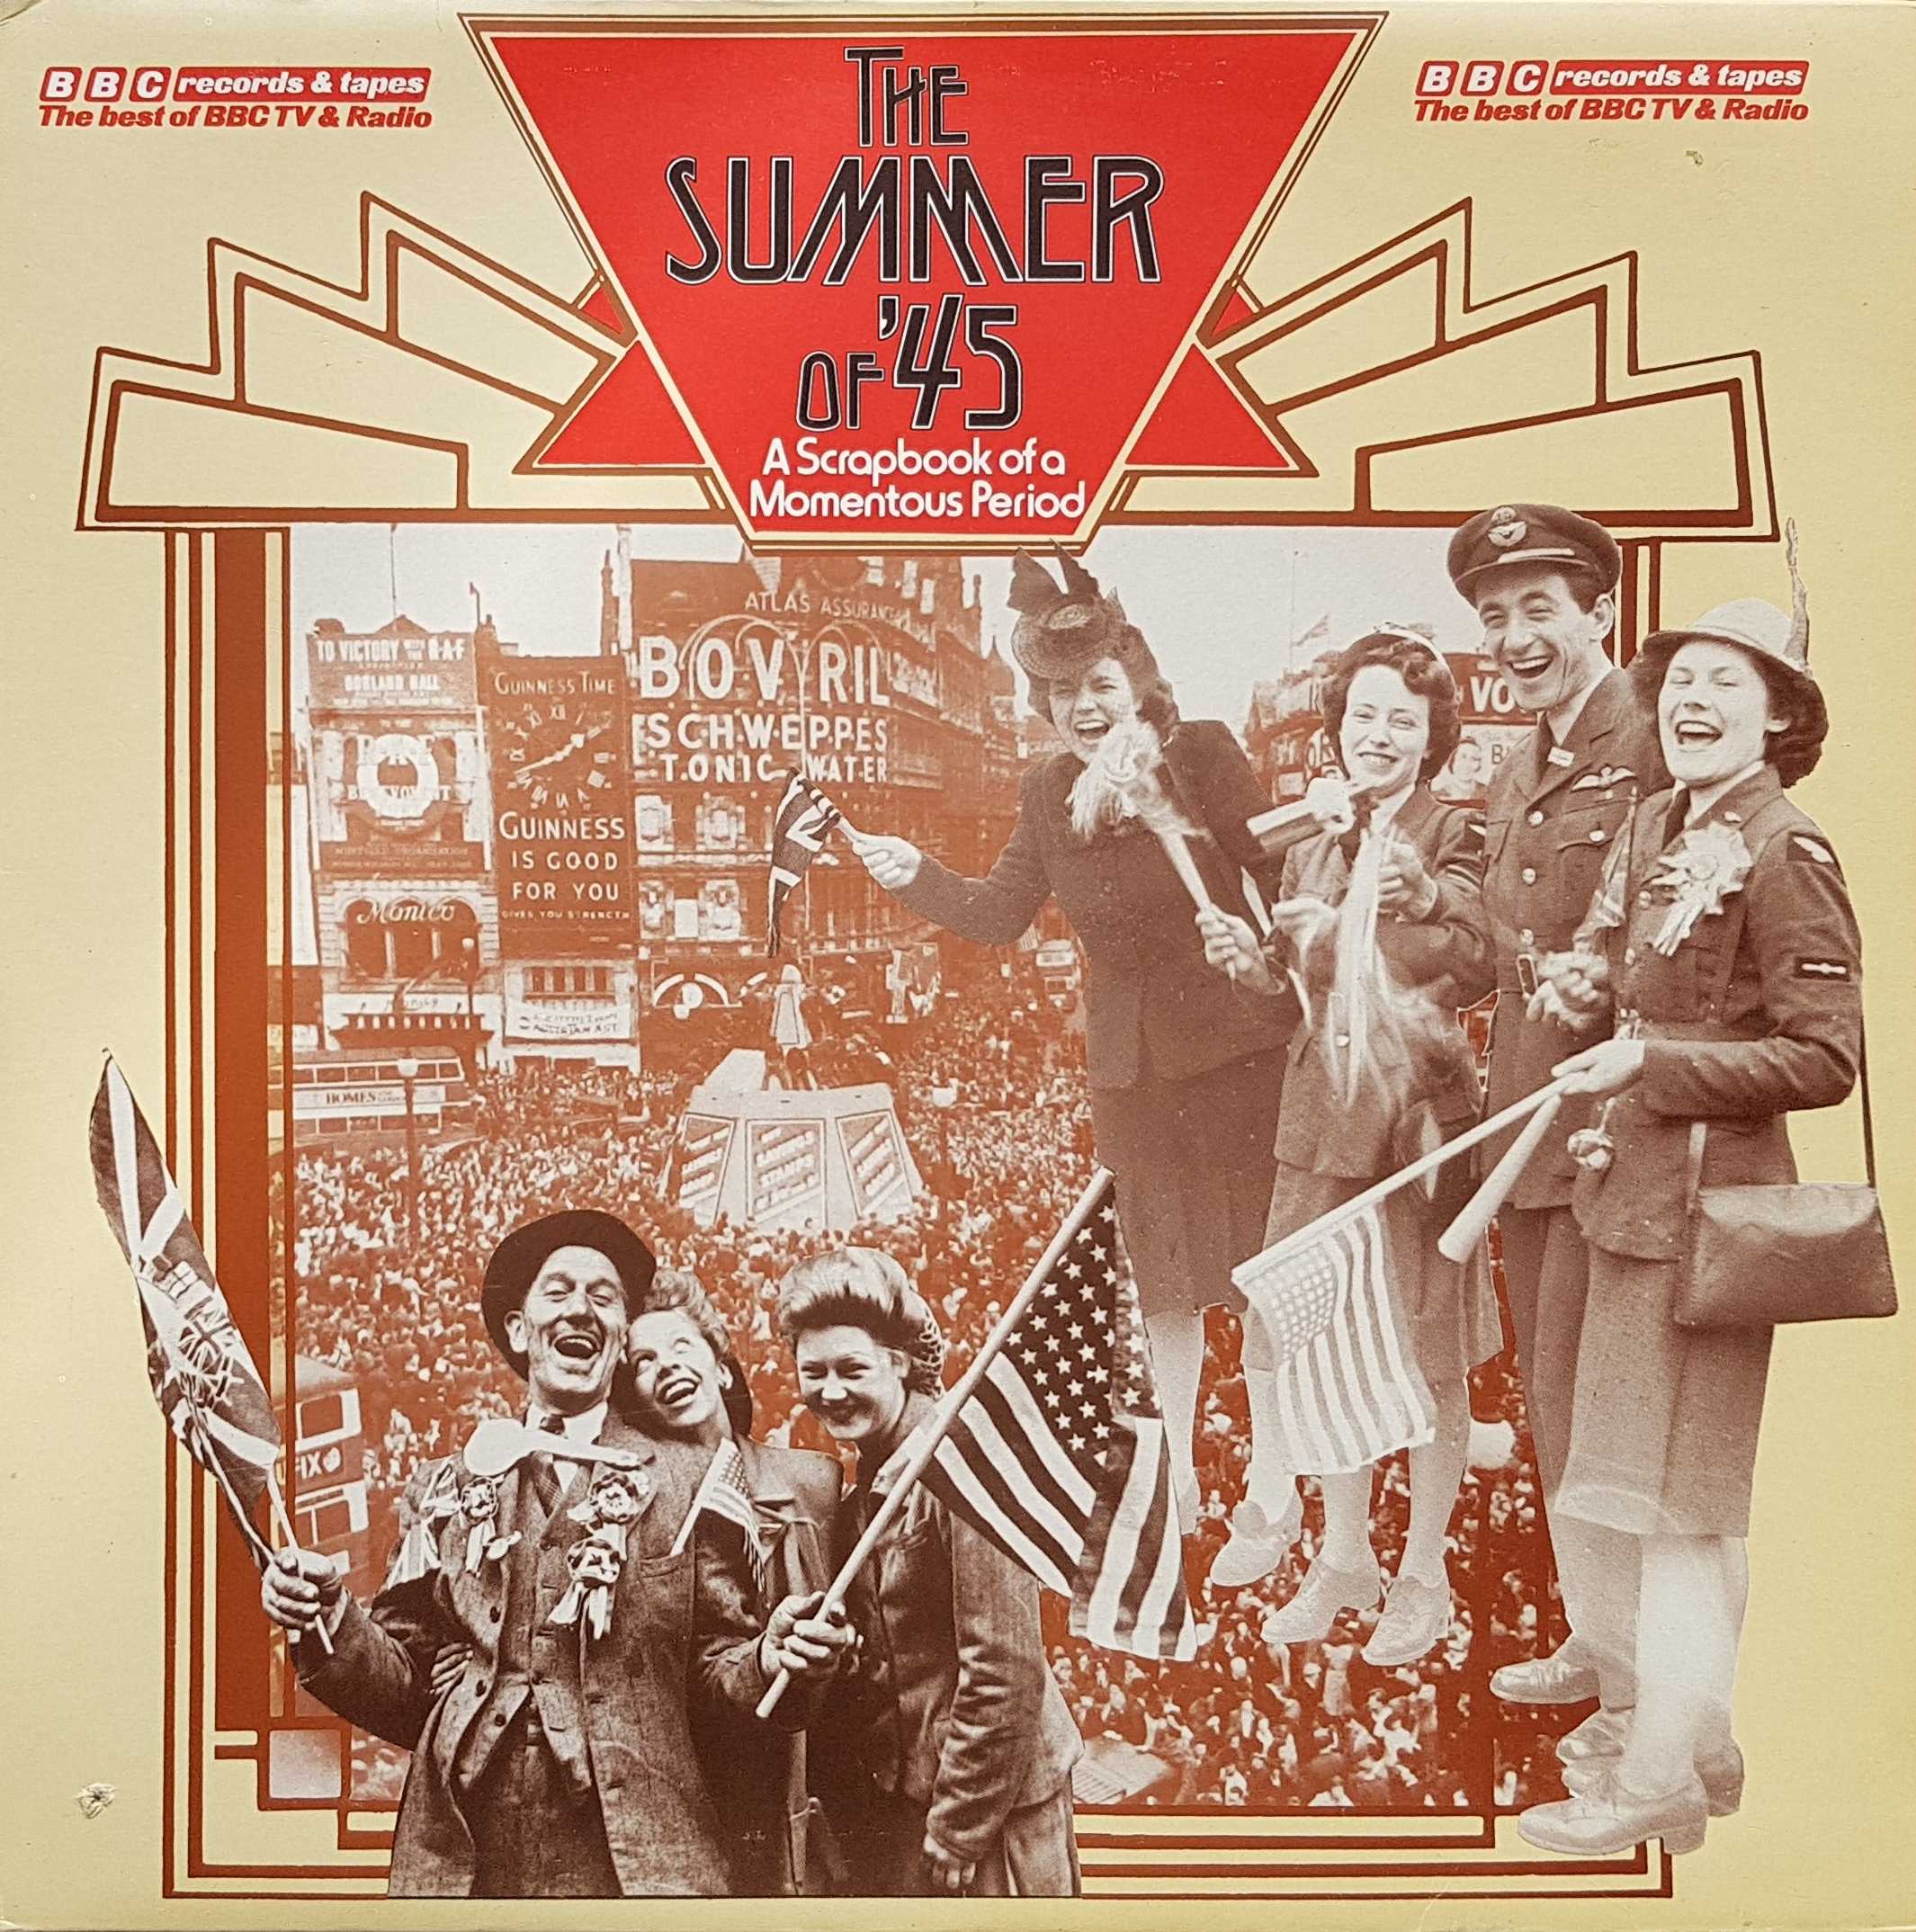 Picture of BBC 52 The Summer Of '45 (A scrapbook of a momentous period) by artist Various from the BBC albums - Records and Tapes library